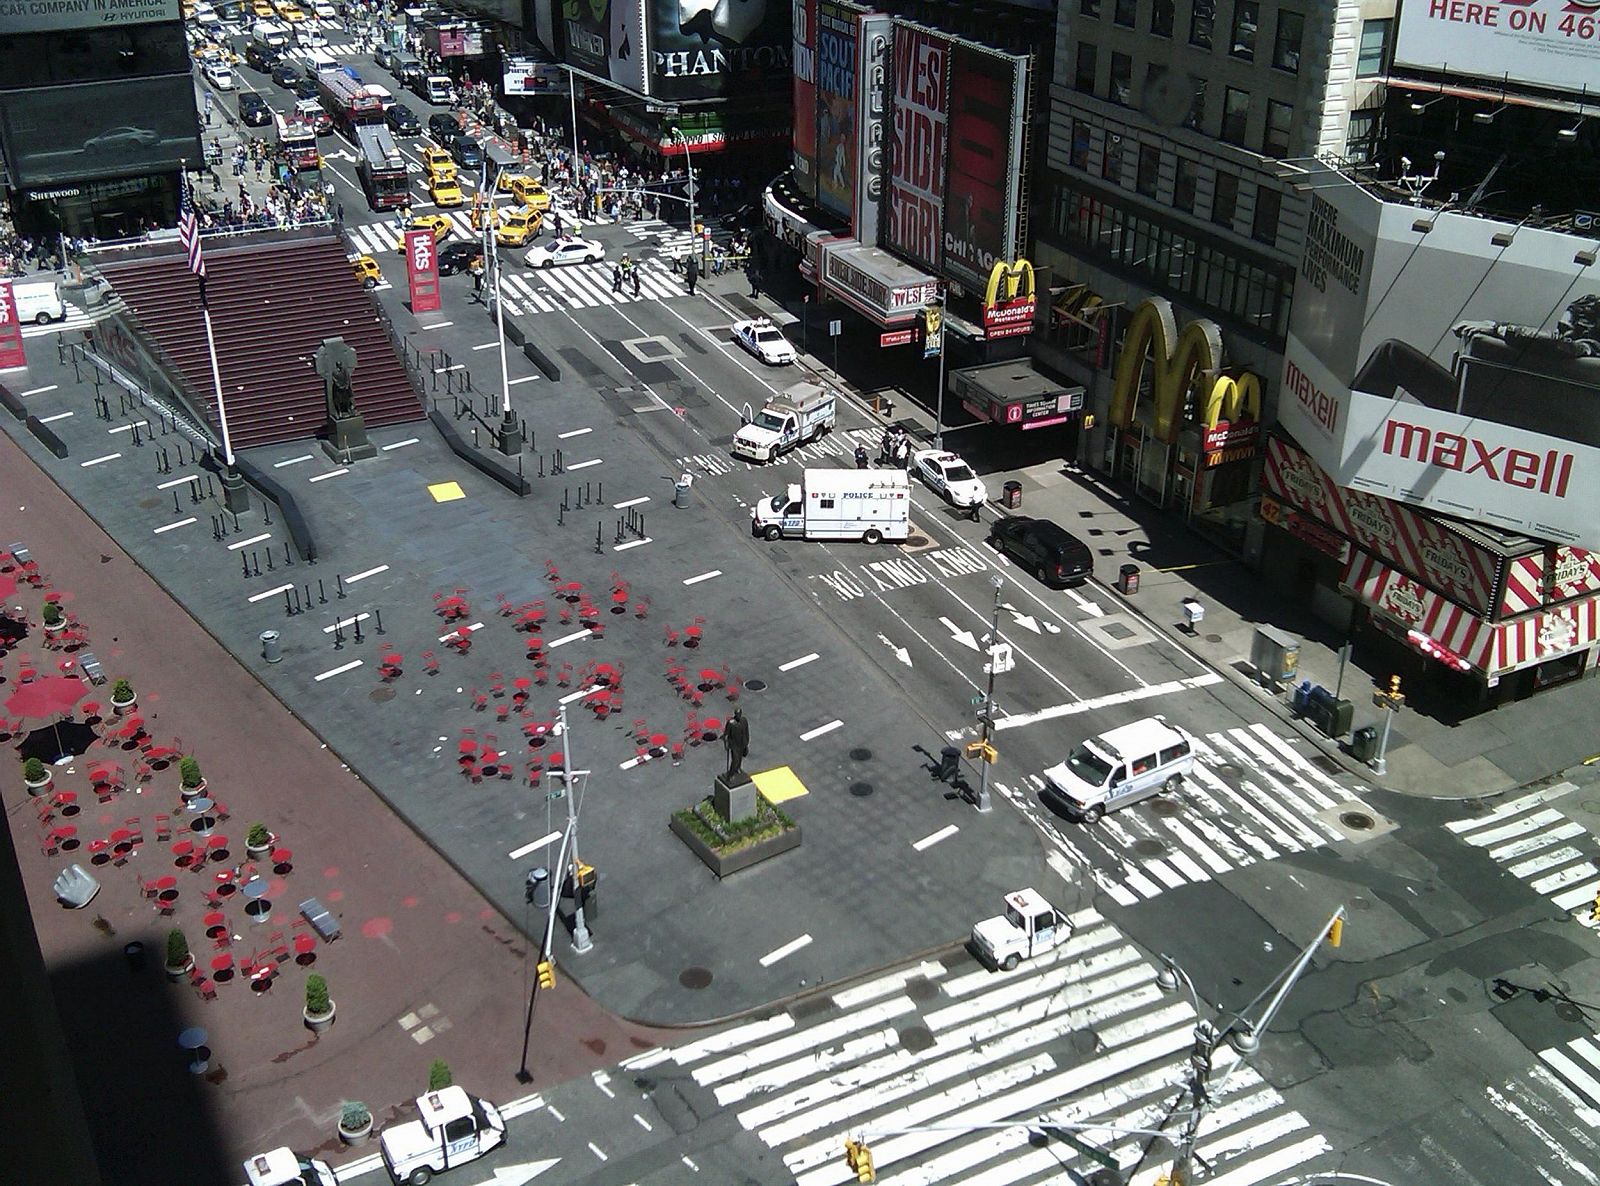 An area of Times Square is evacuated as police investigate a suspicious package on the street in New York